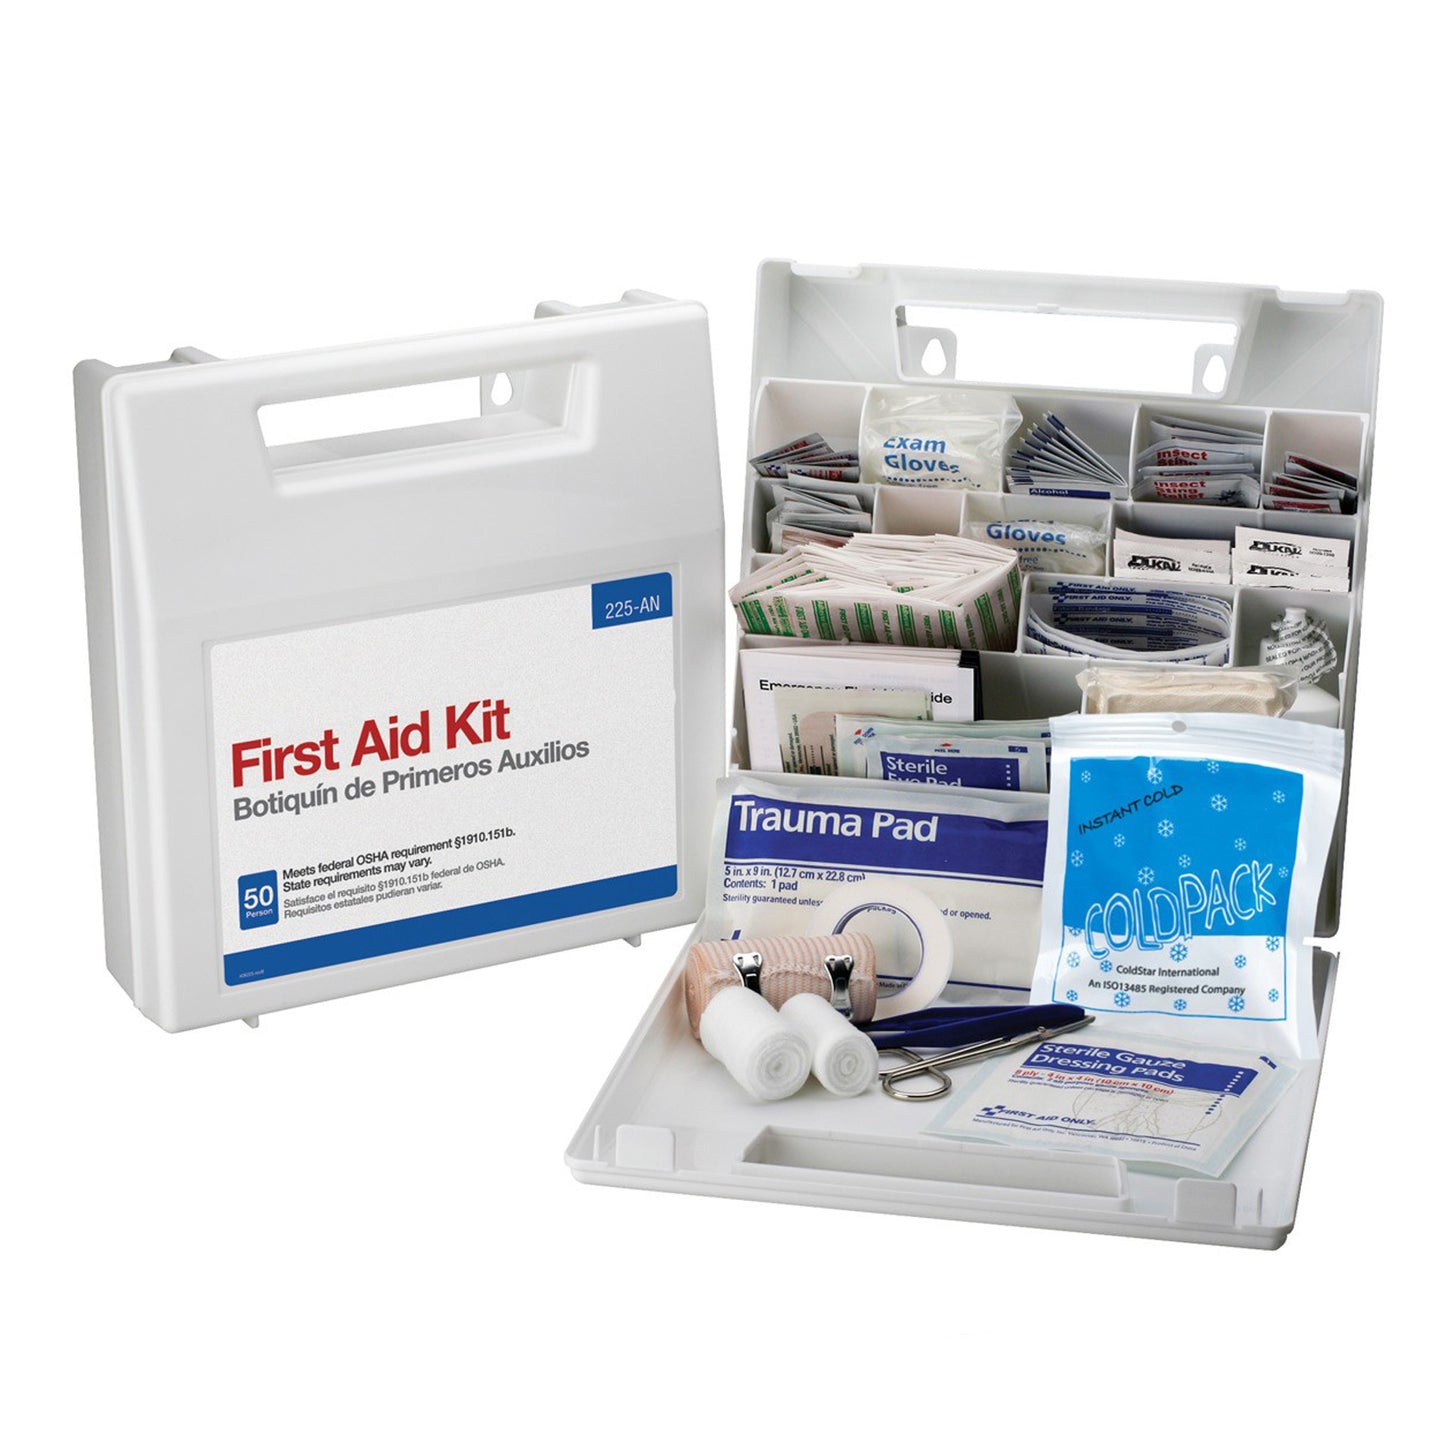 First Aid Kit 225-AN 50-Person - 195 Pieces - EXPIRED